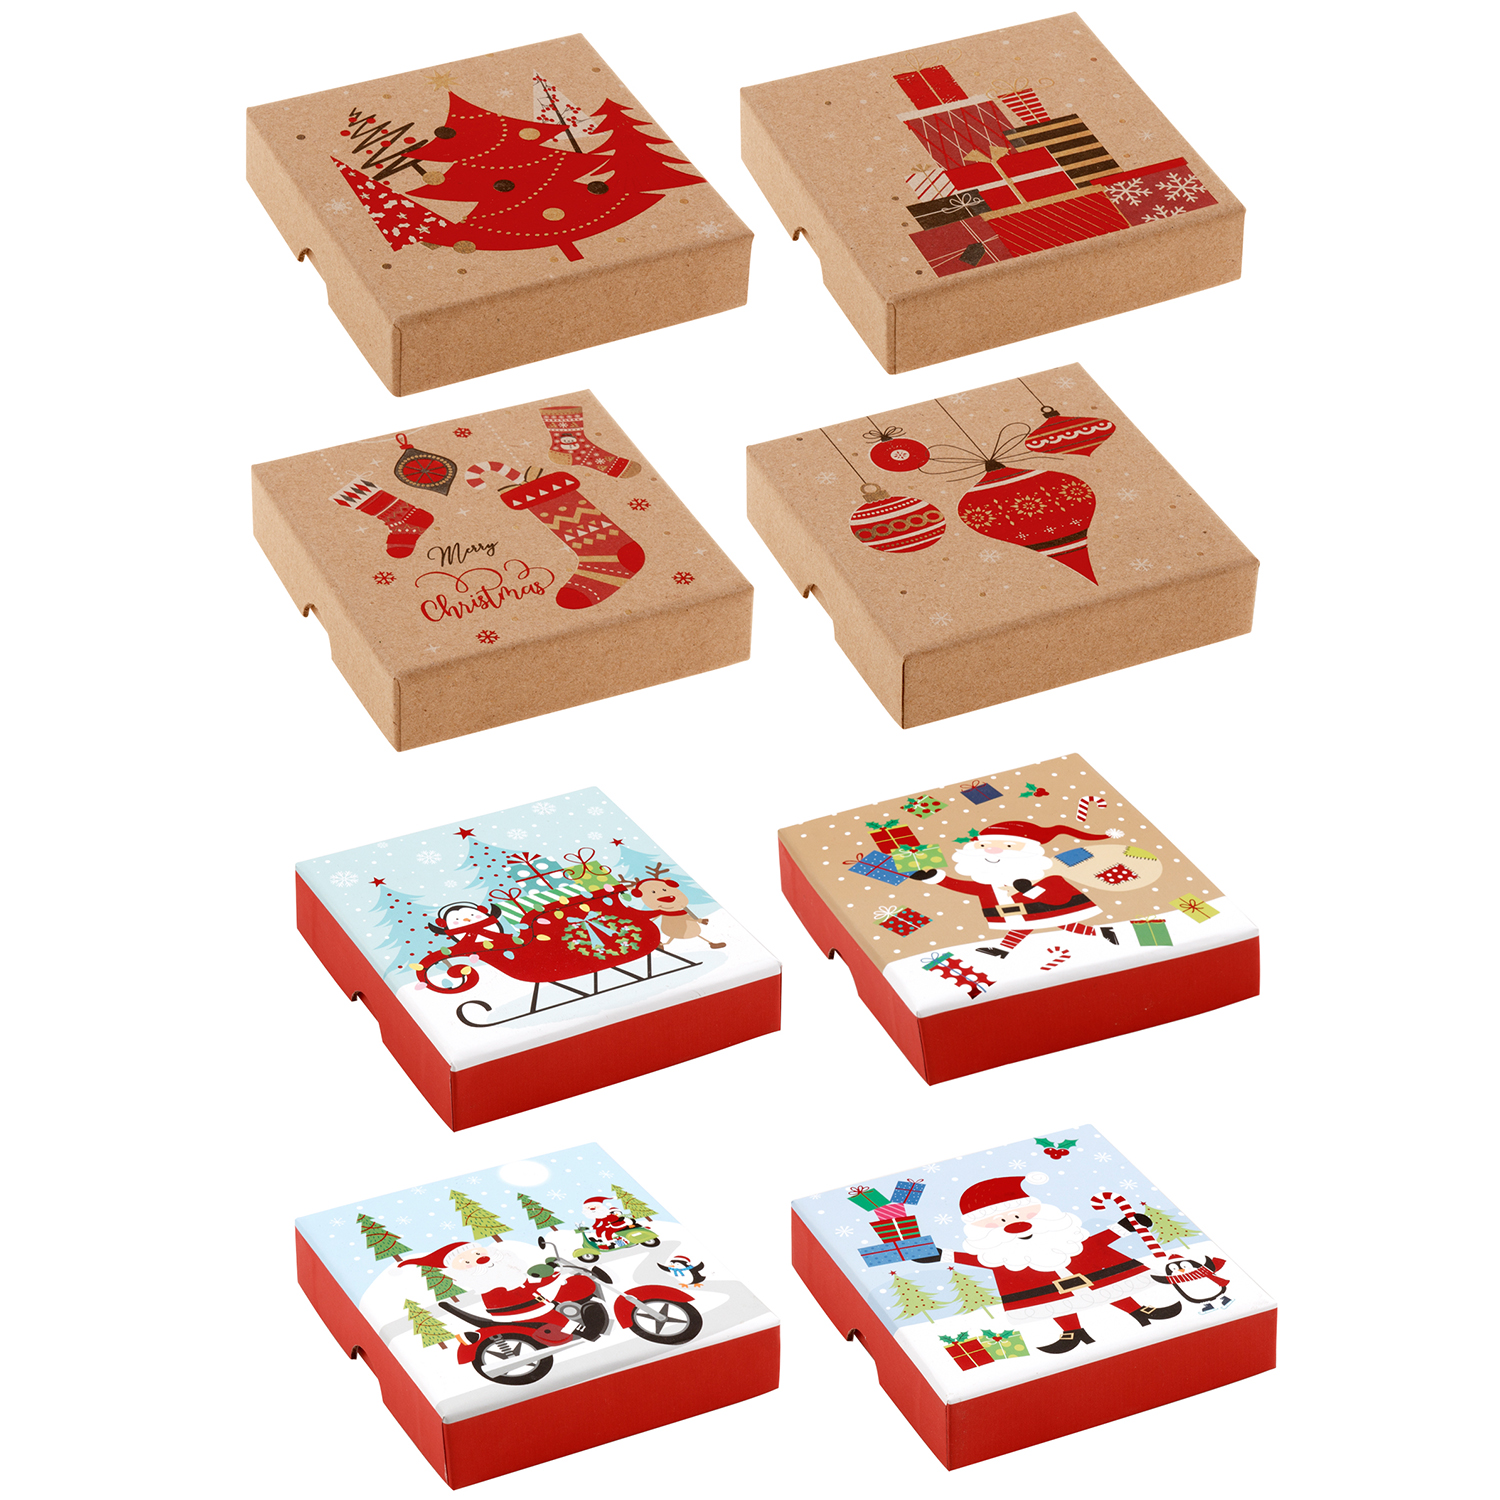 4x Christmas Square Gift Box Set Xmas Packaging Wrap Candy Treat Present Décor